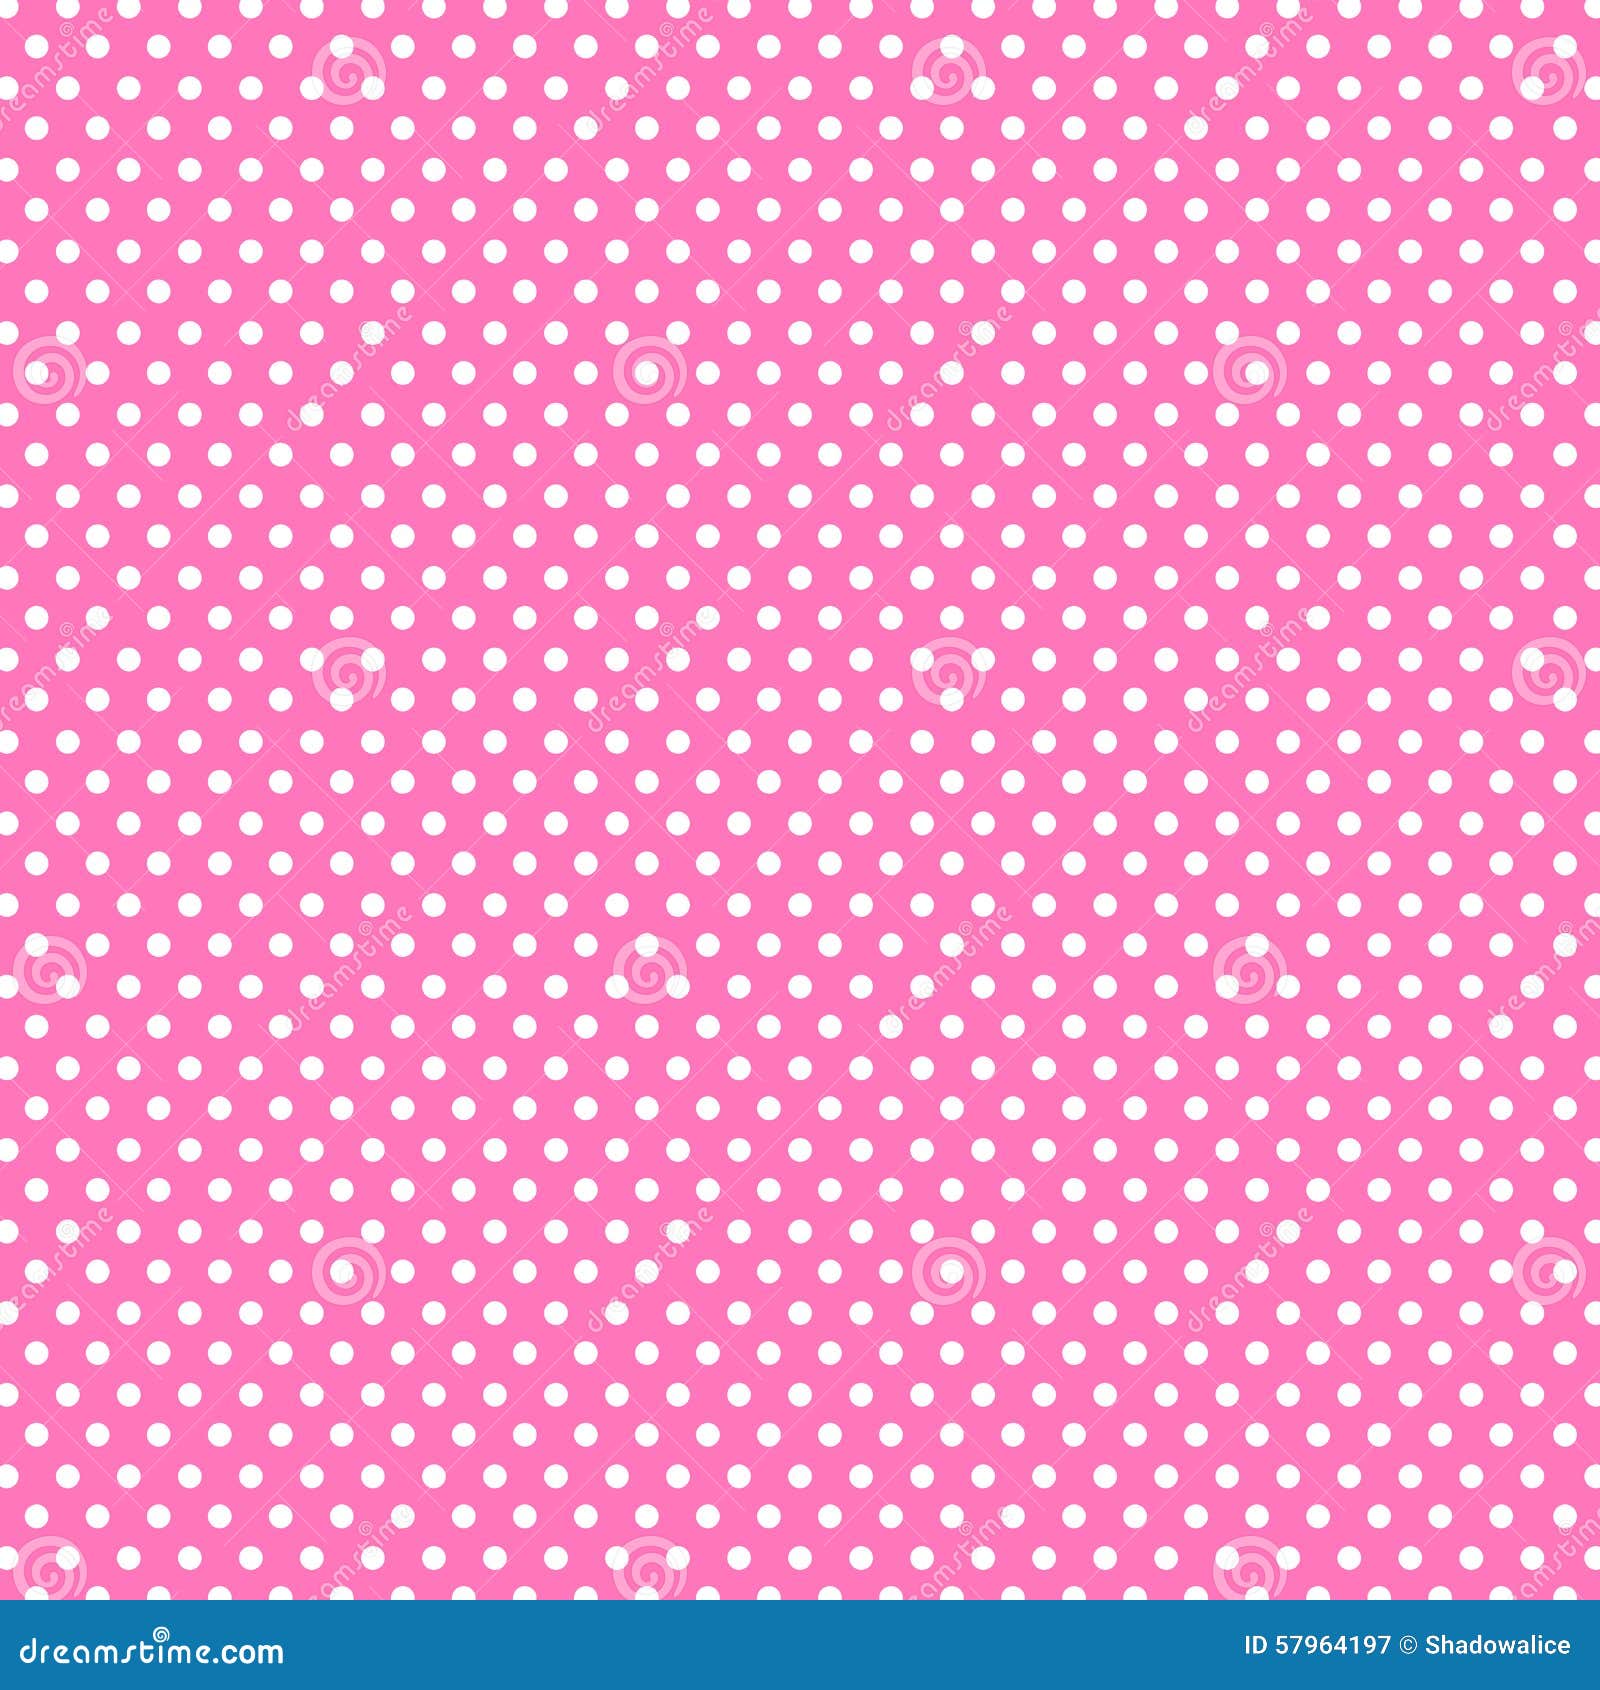 Pink Dot Background Great For Any Use. Vector EPS10. Stock Vector ...